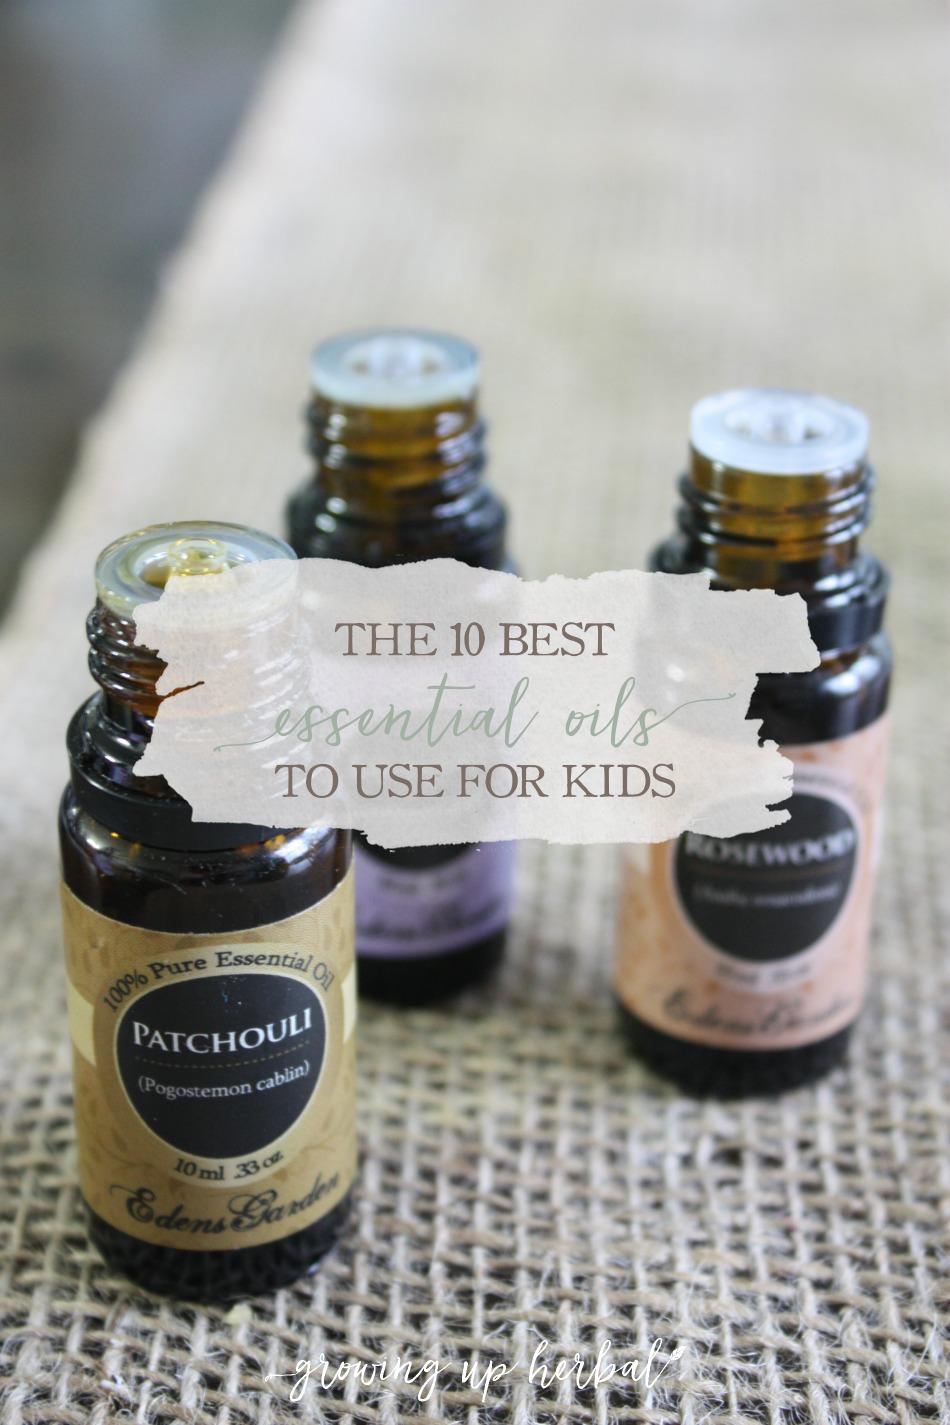 The 10 Best Essential Oils To Use For Kids | Growing Up Herbal | Looking for a list of essential oils to have on hand for your kids? Here's a list of 10 to get you started!